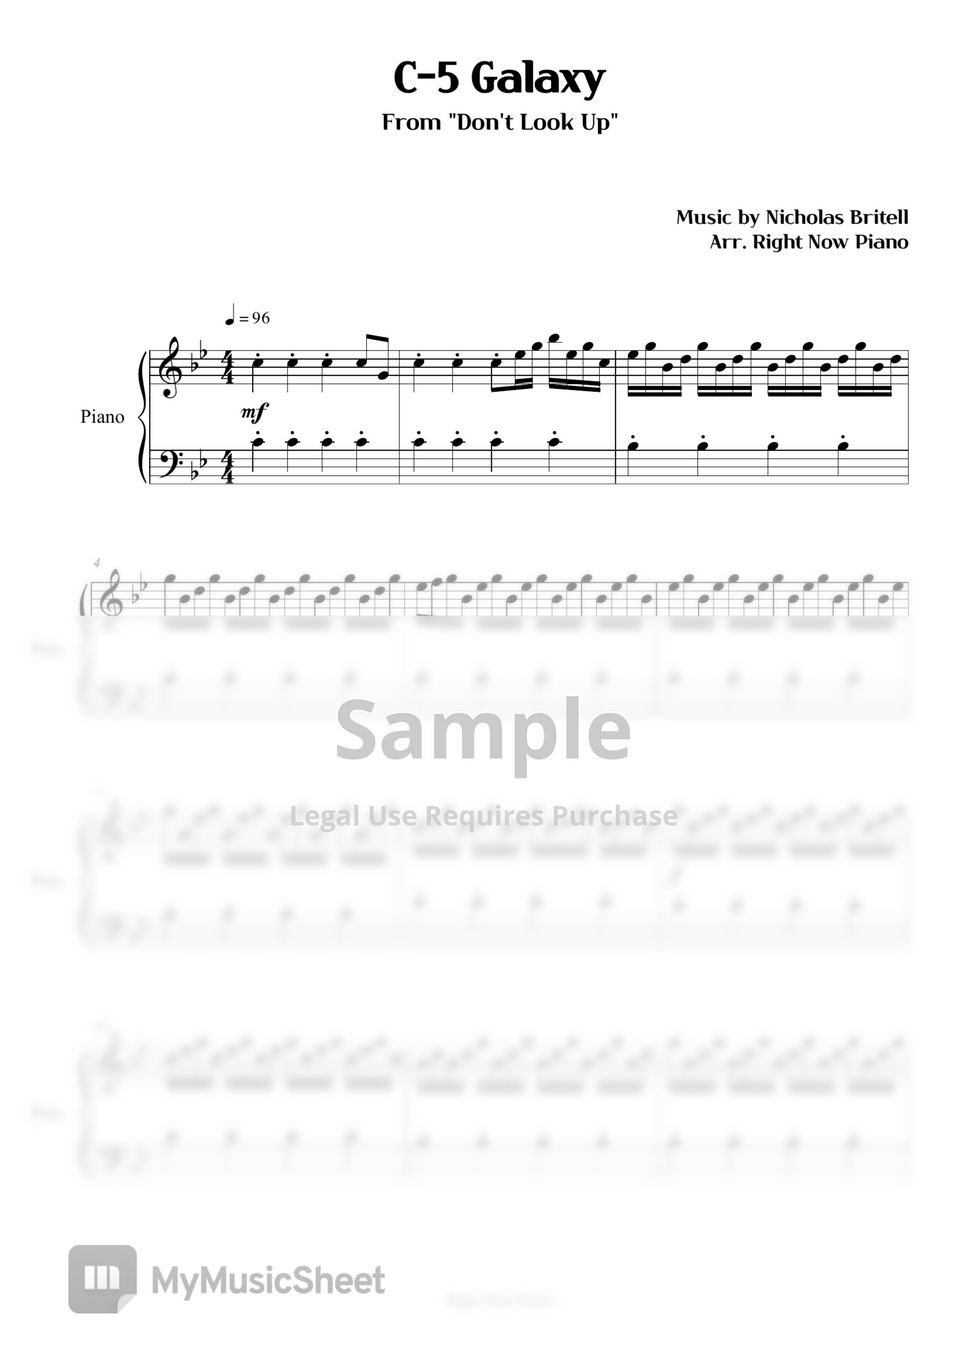 Don't Look Up - C-5 Galaxy Sheet by Right Now Piano